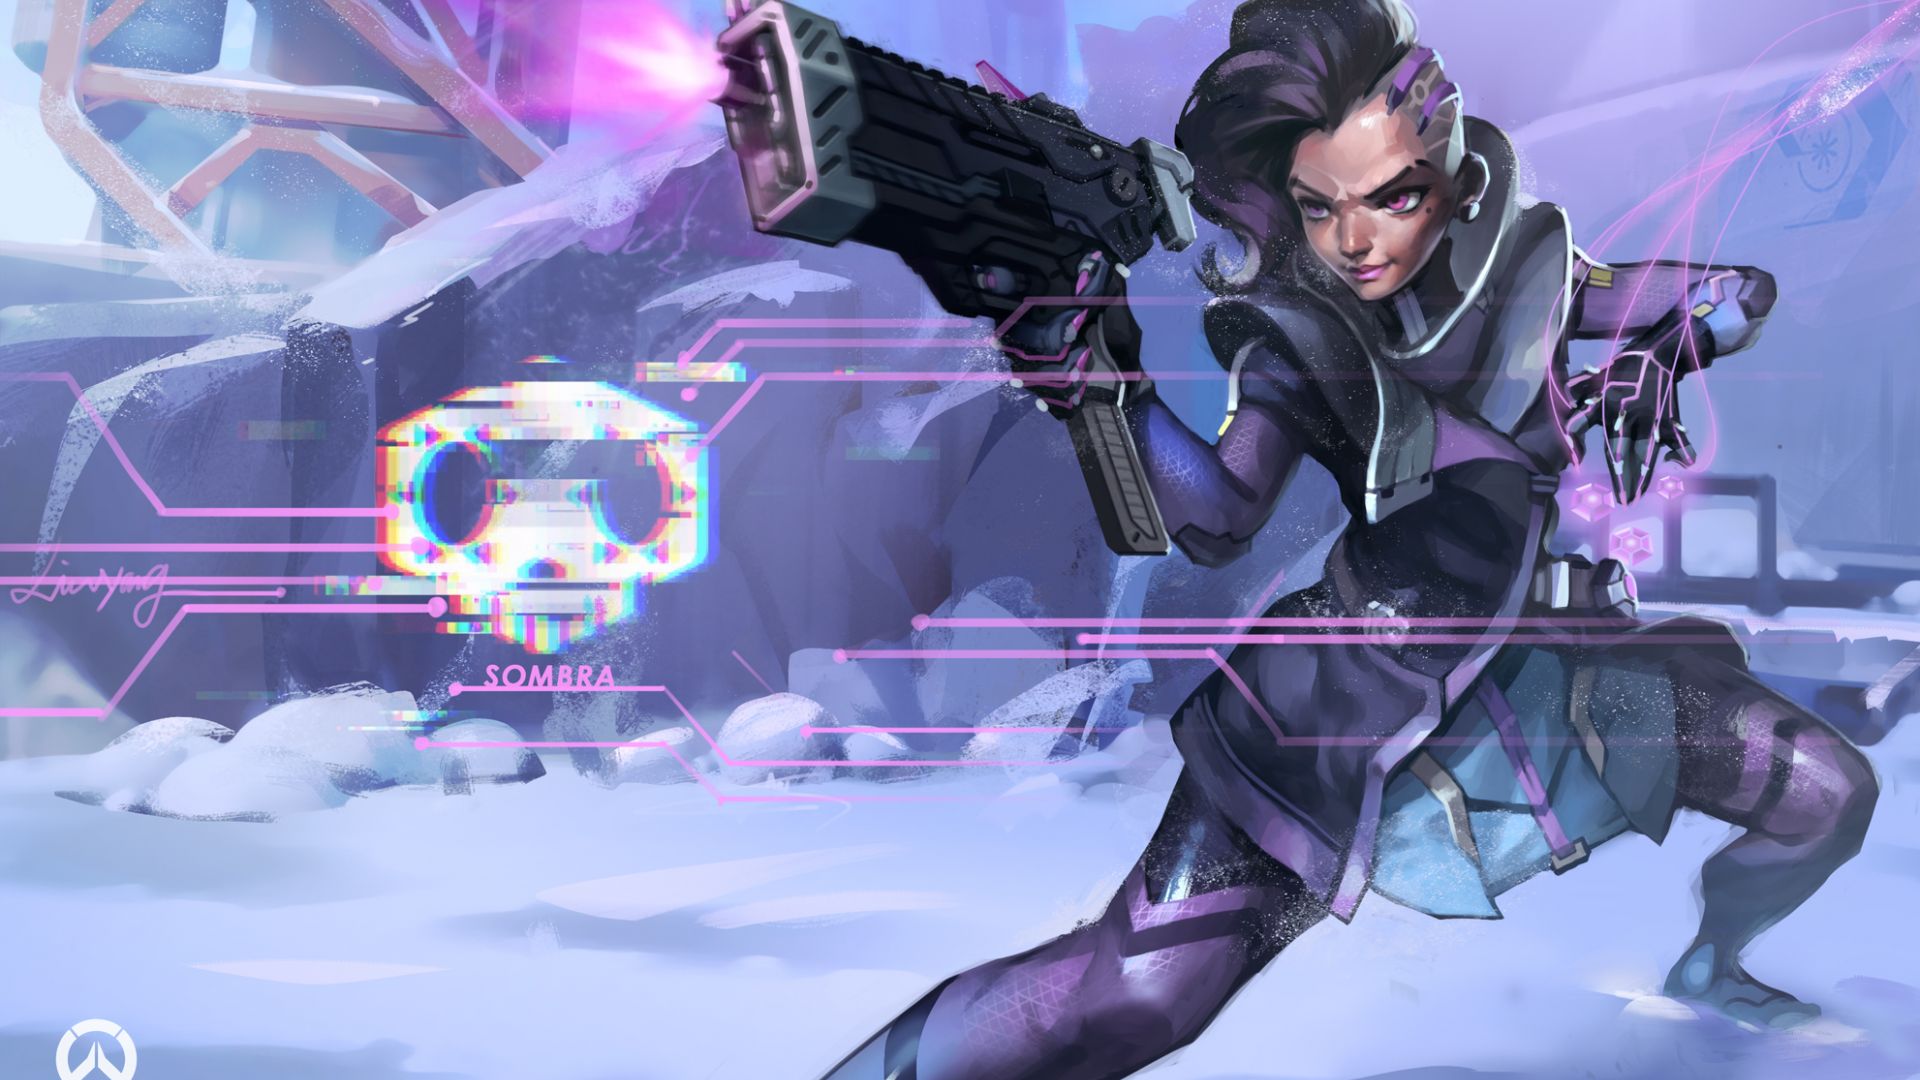 Wallpaper Sombra, overwatch video game, gaming